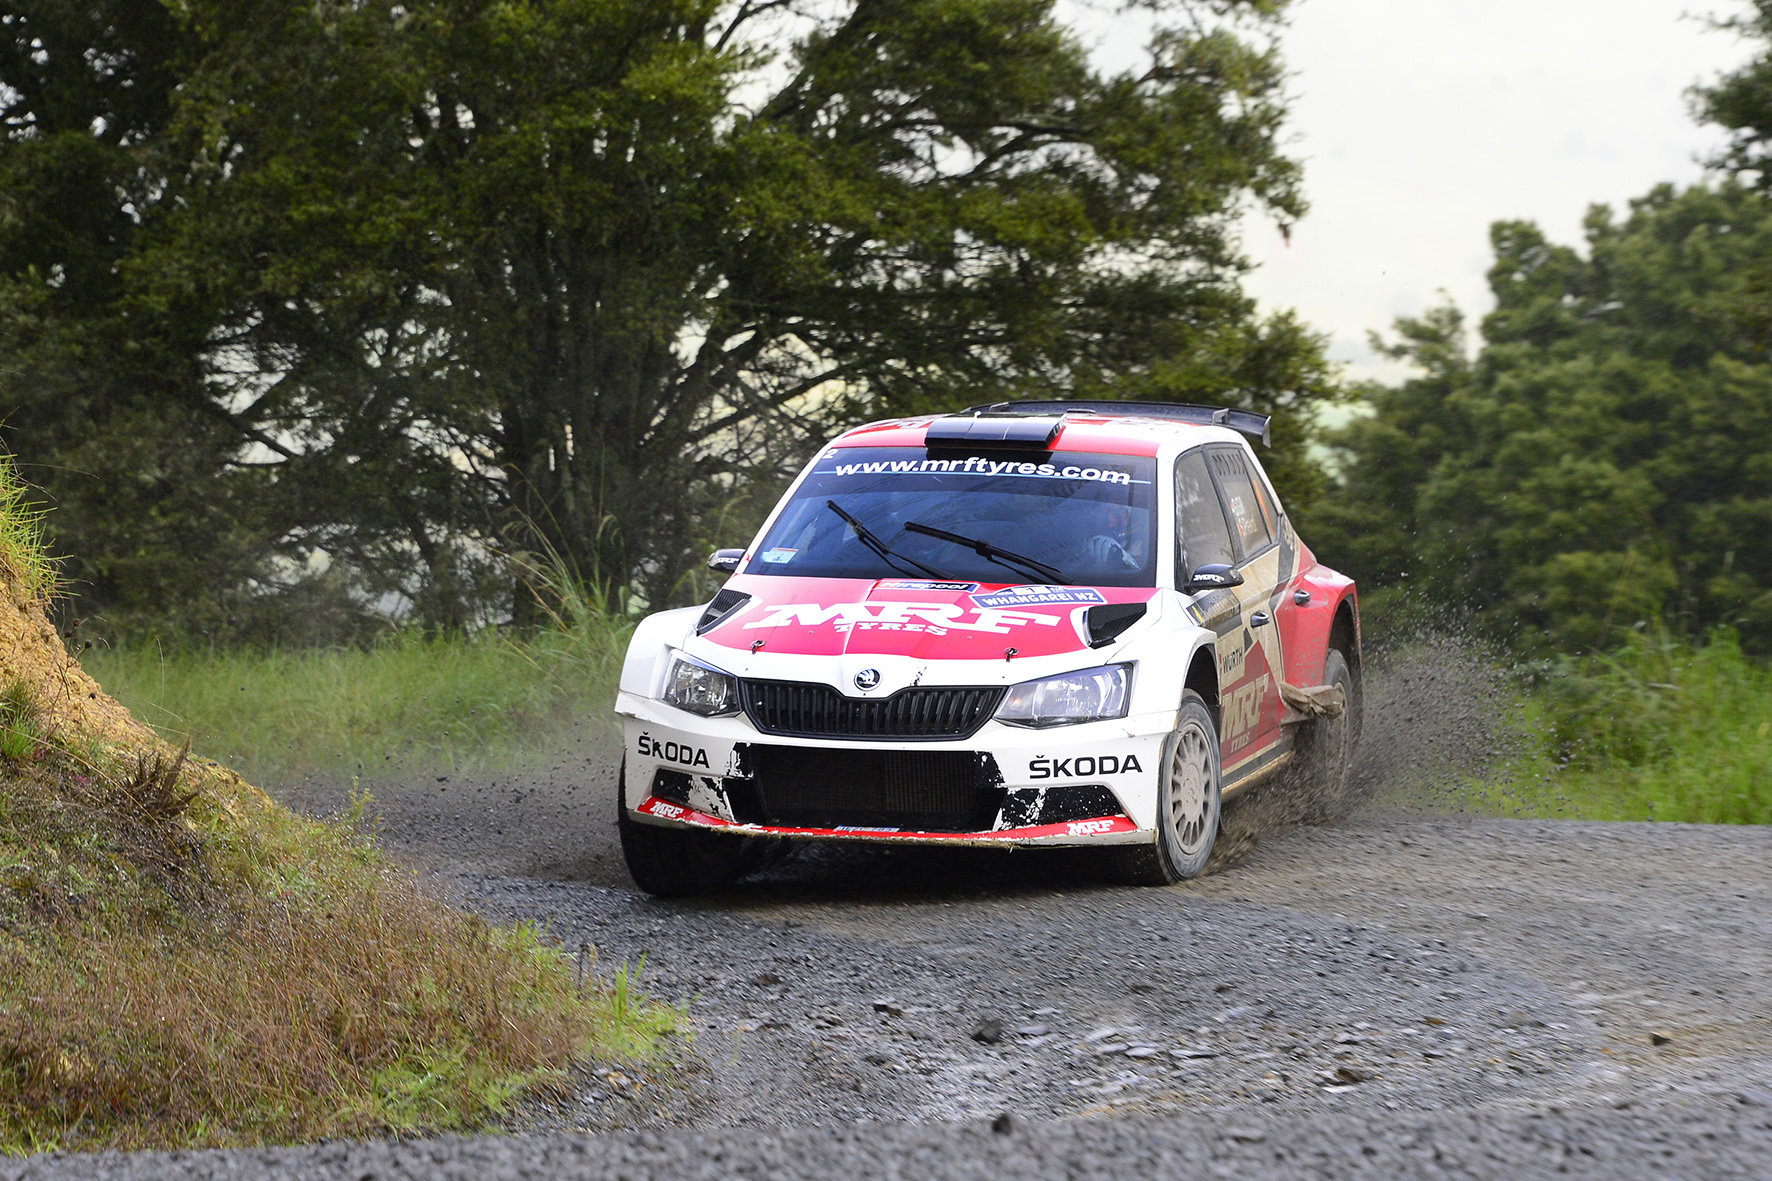 Victory for India’s Gill at International Rally of Whangarei